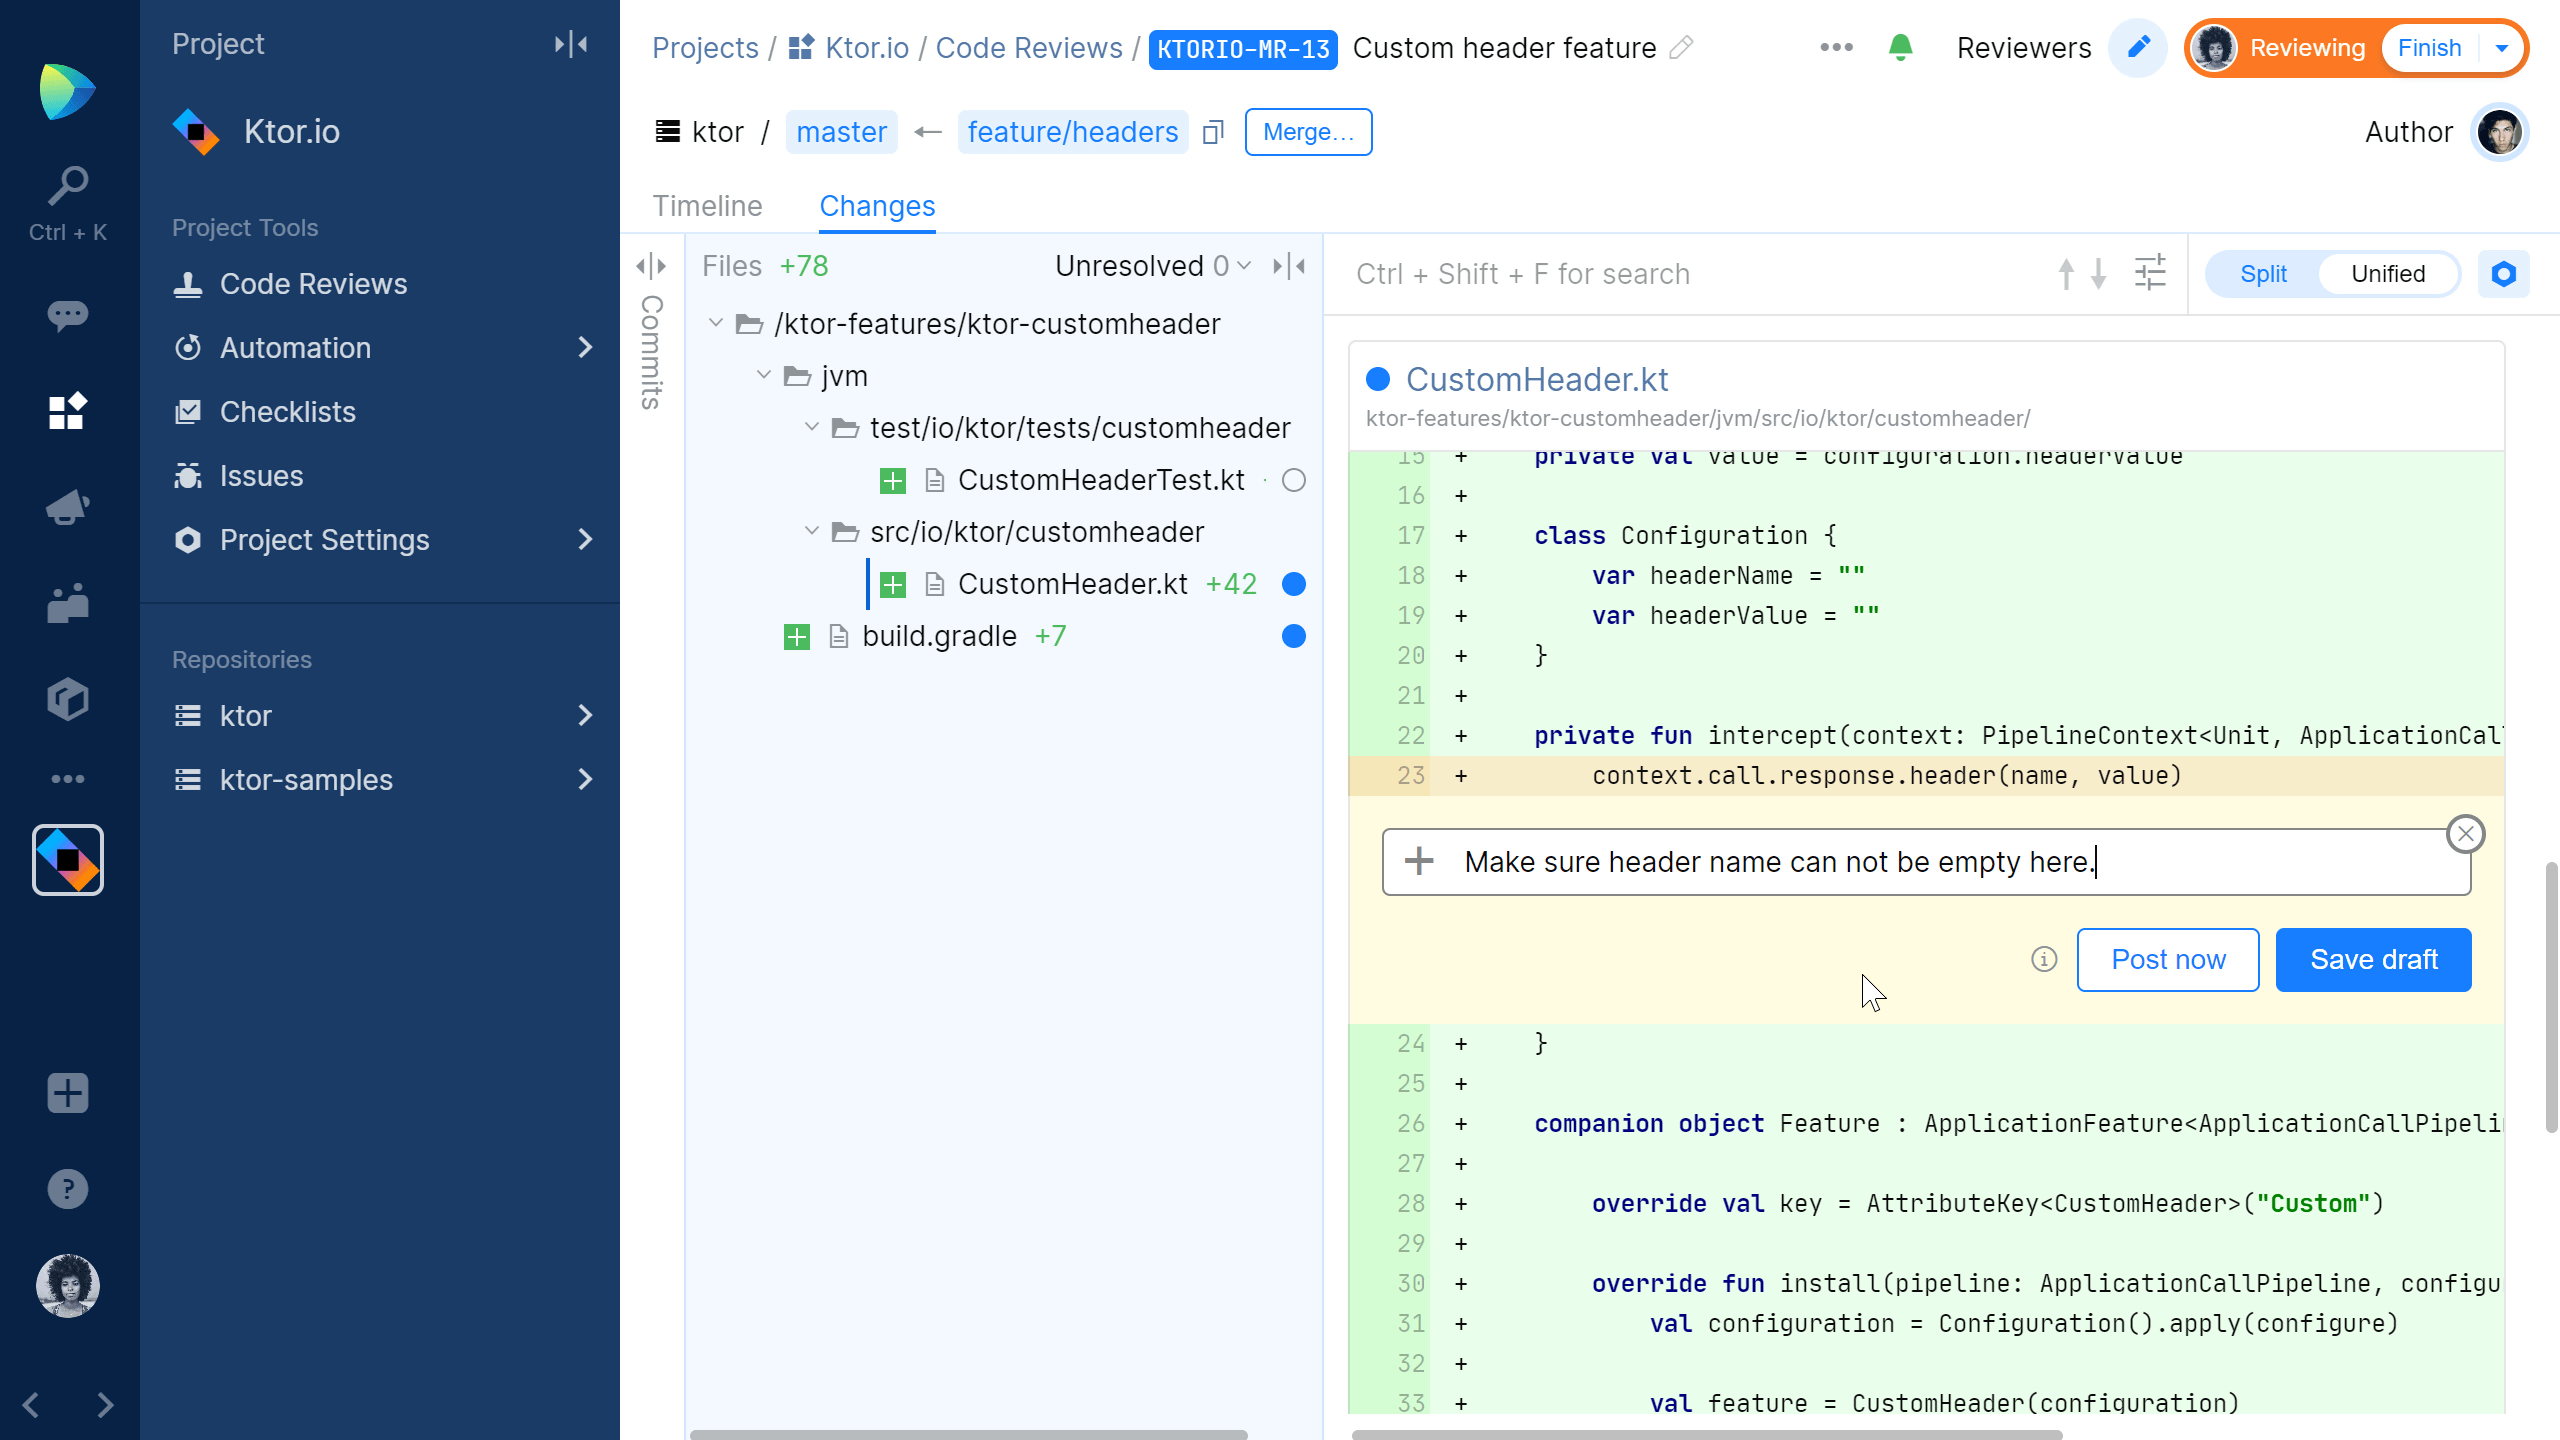 Reviewer sees code, and can read and add comments